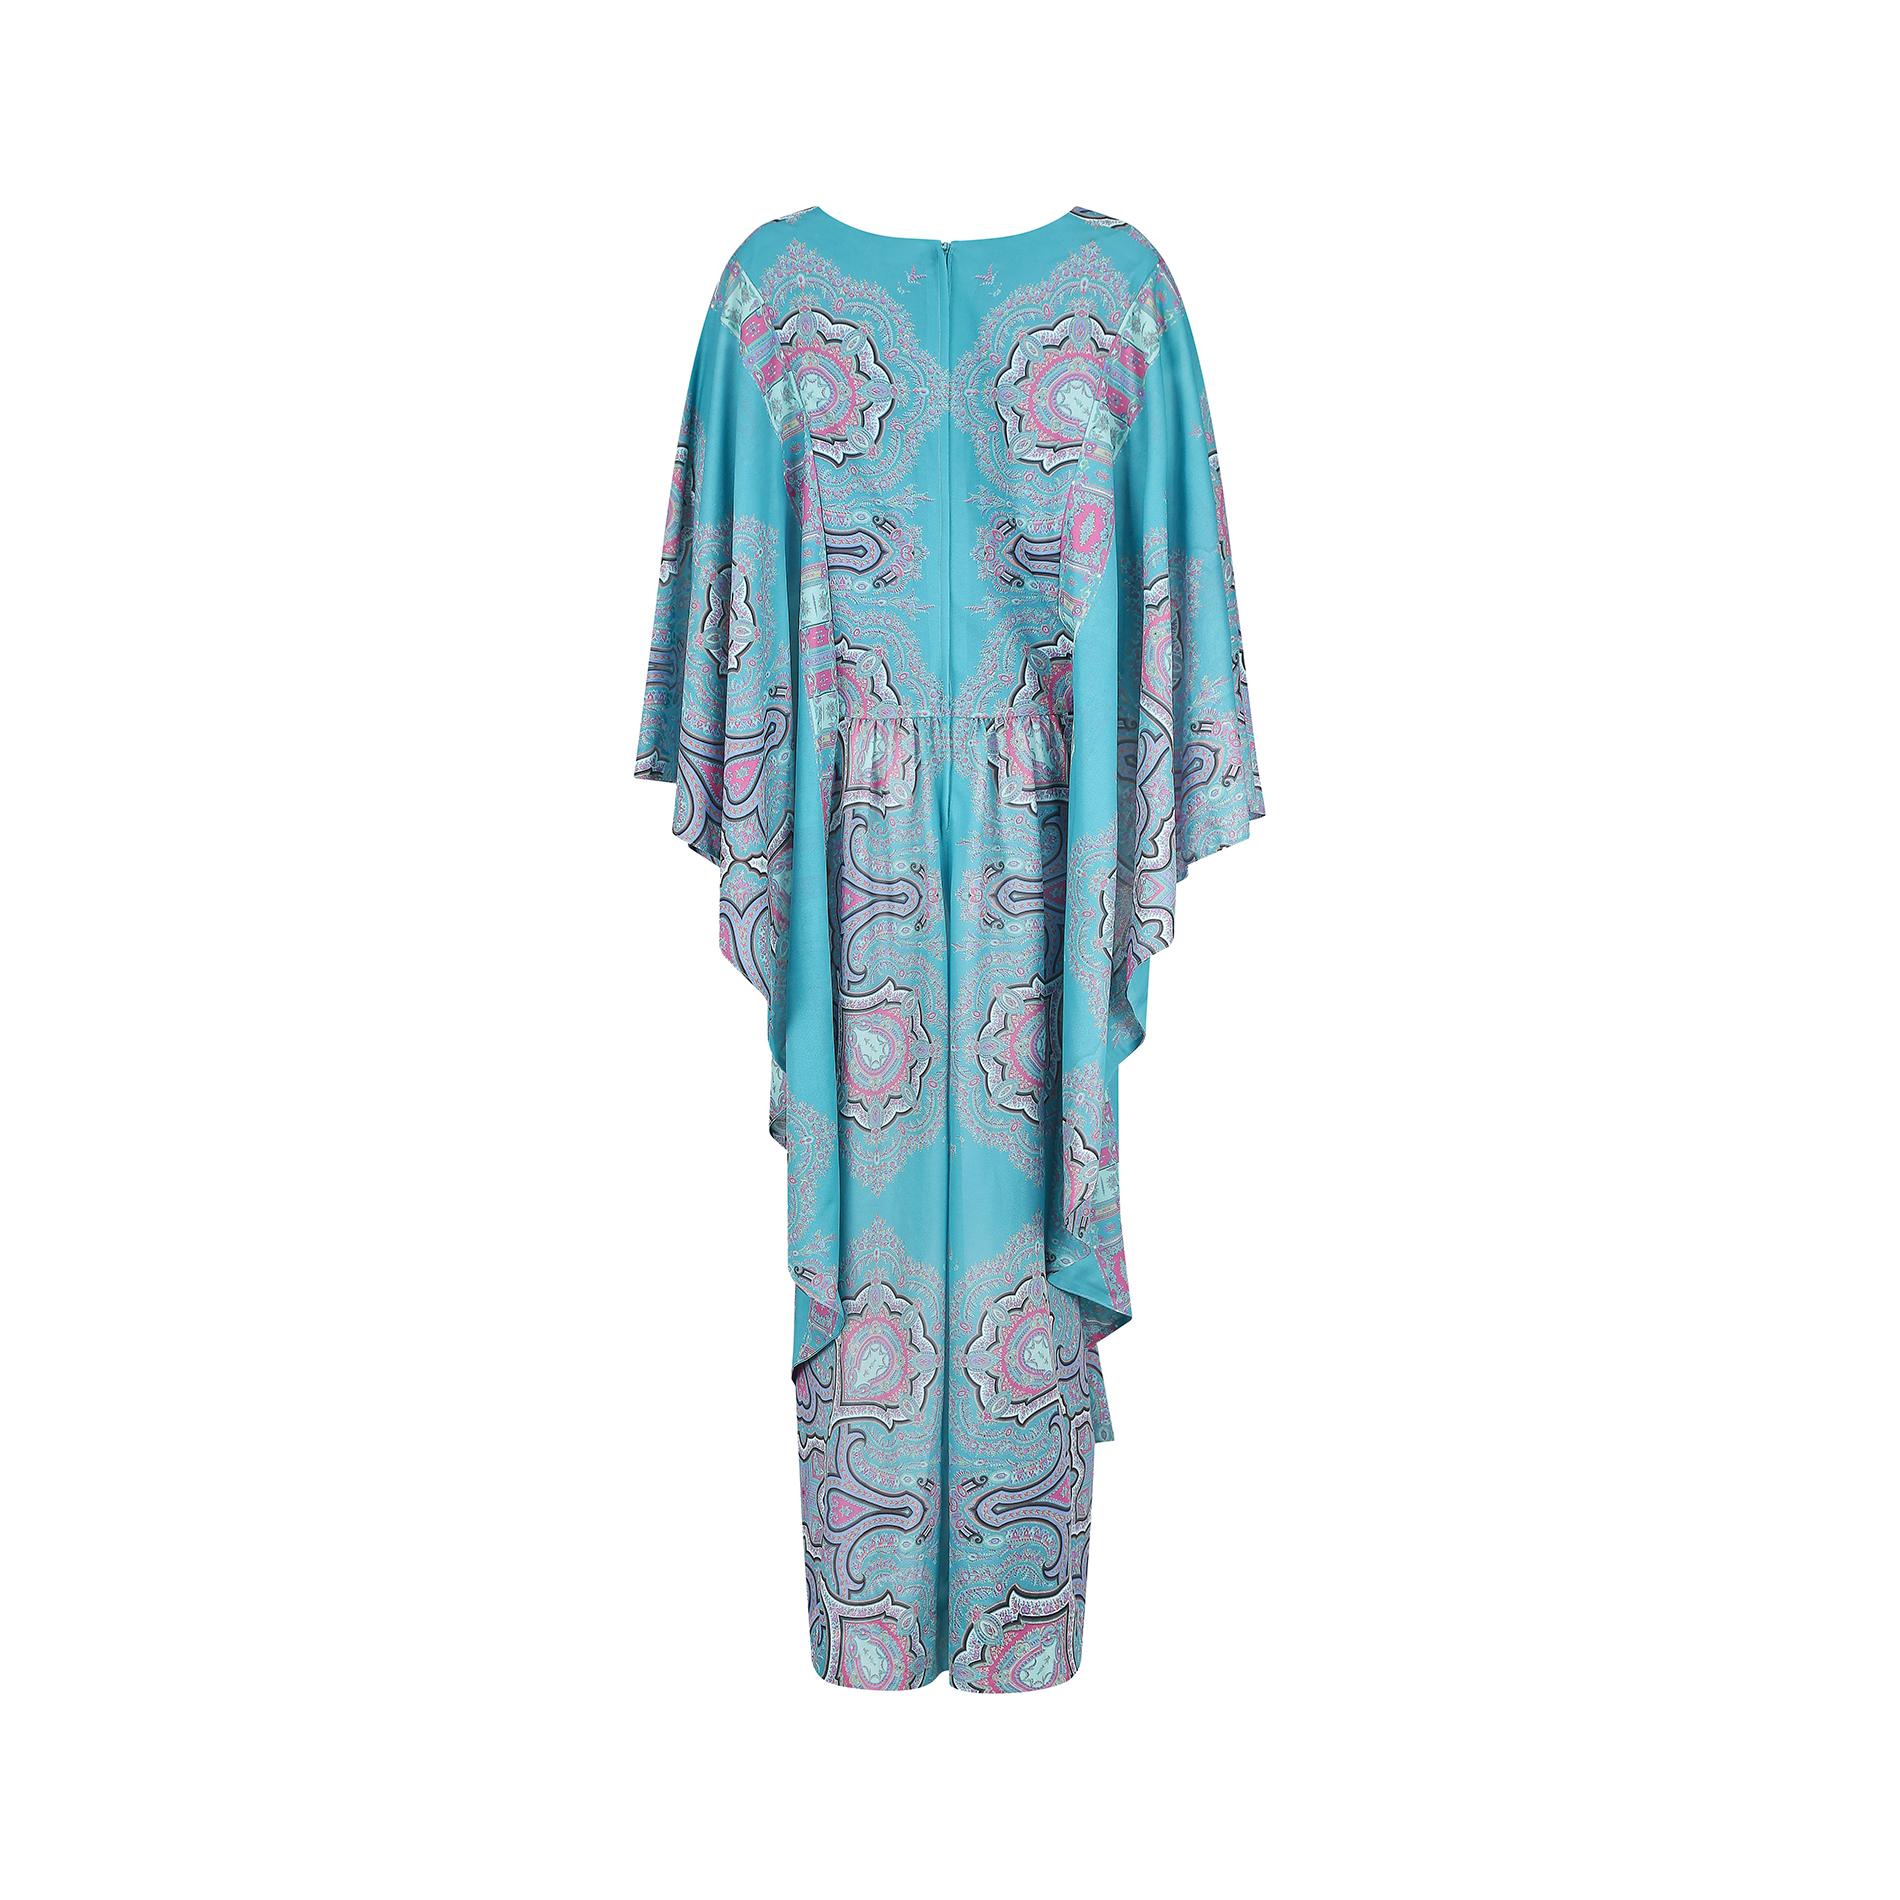 1970s John Neville Turquoise Paisley Print Maxi Dress In Excellent Condition For Sale In London, GB